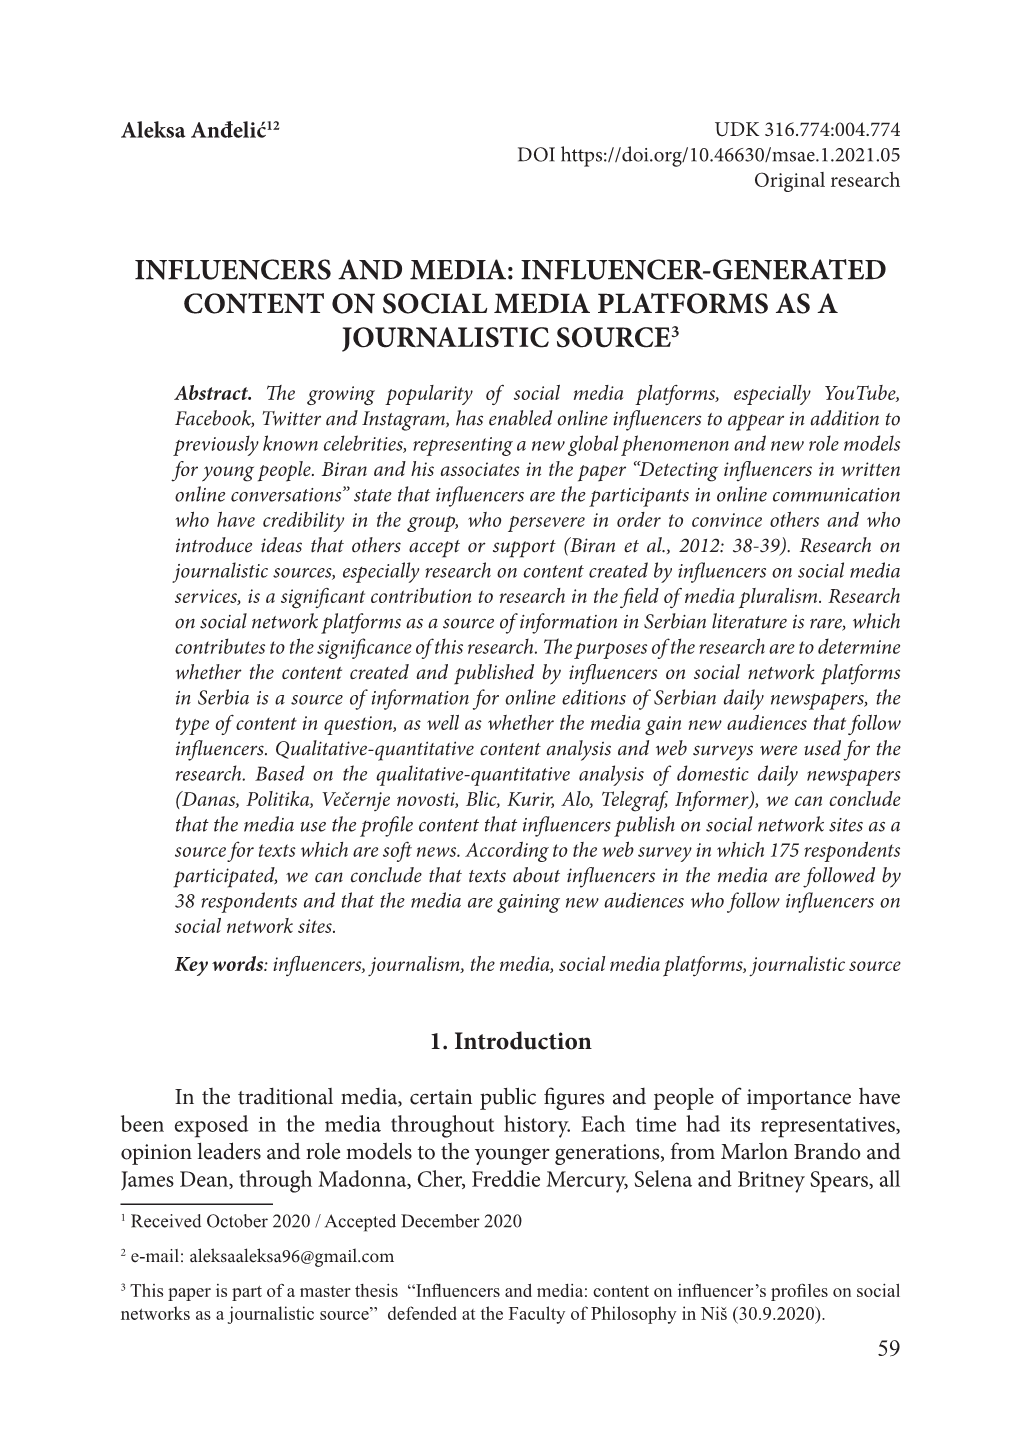 Influencers and Media: Influencer-Generated Content on Social Media Platforms As a Journalistic Source3